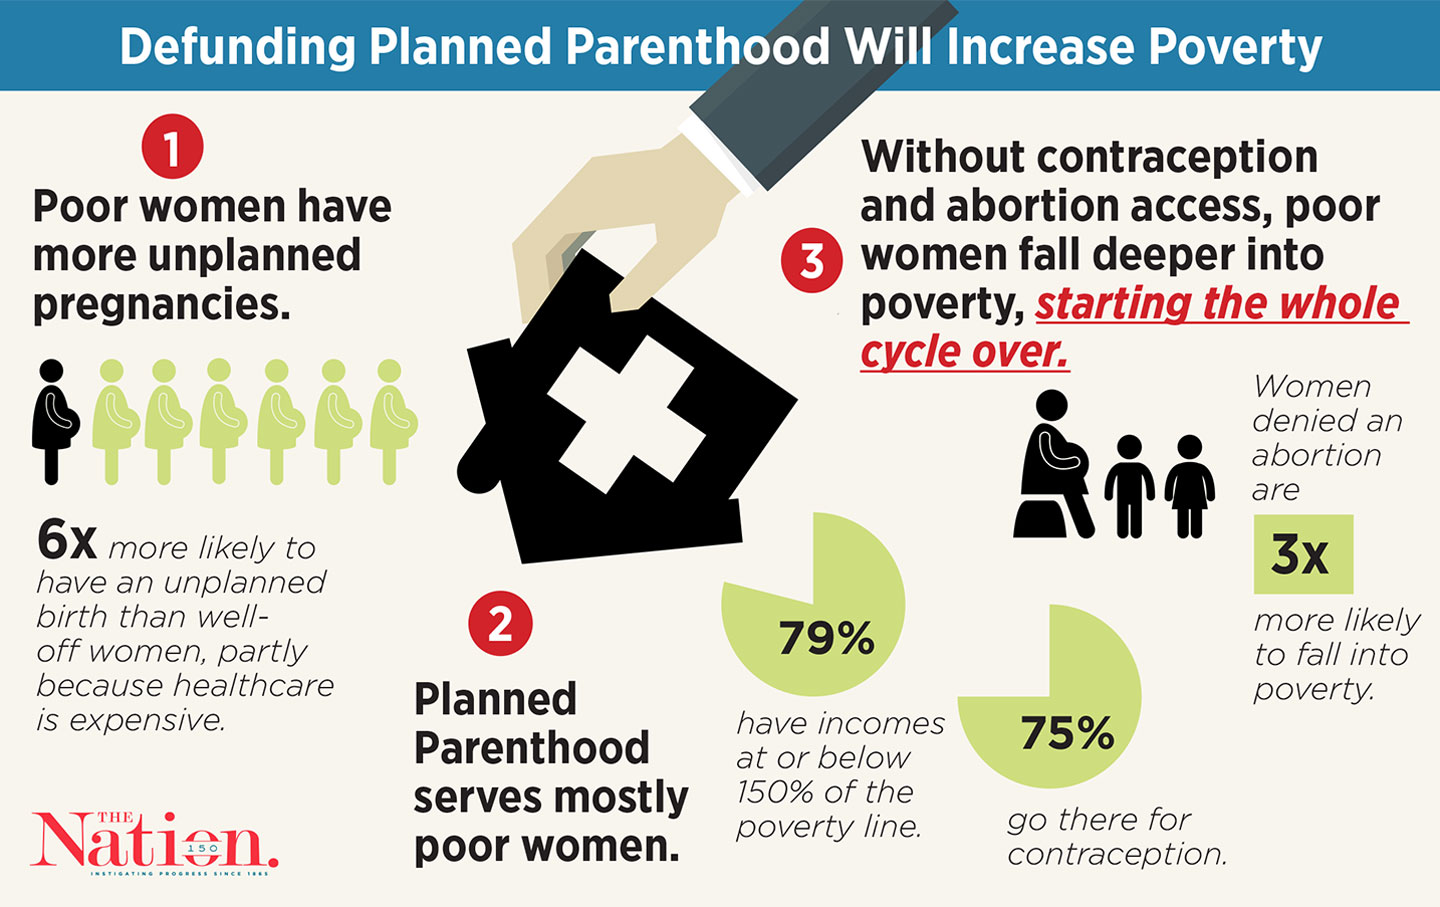 Shutting Down Planned Parenthood Would Catapult Women Into Poverty